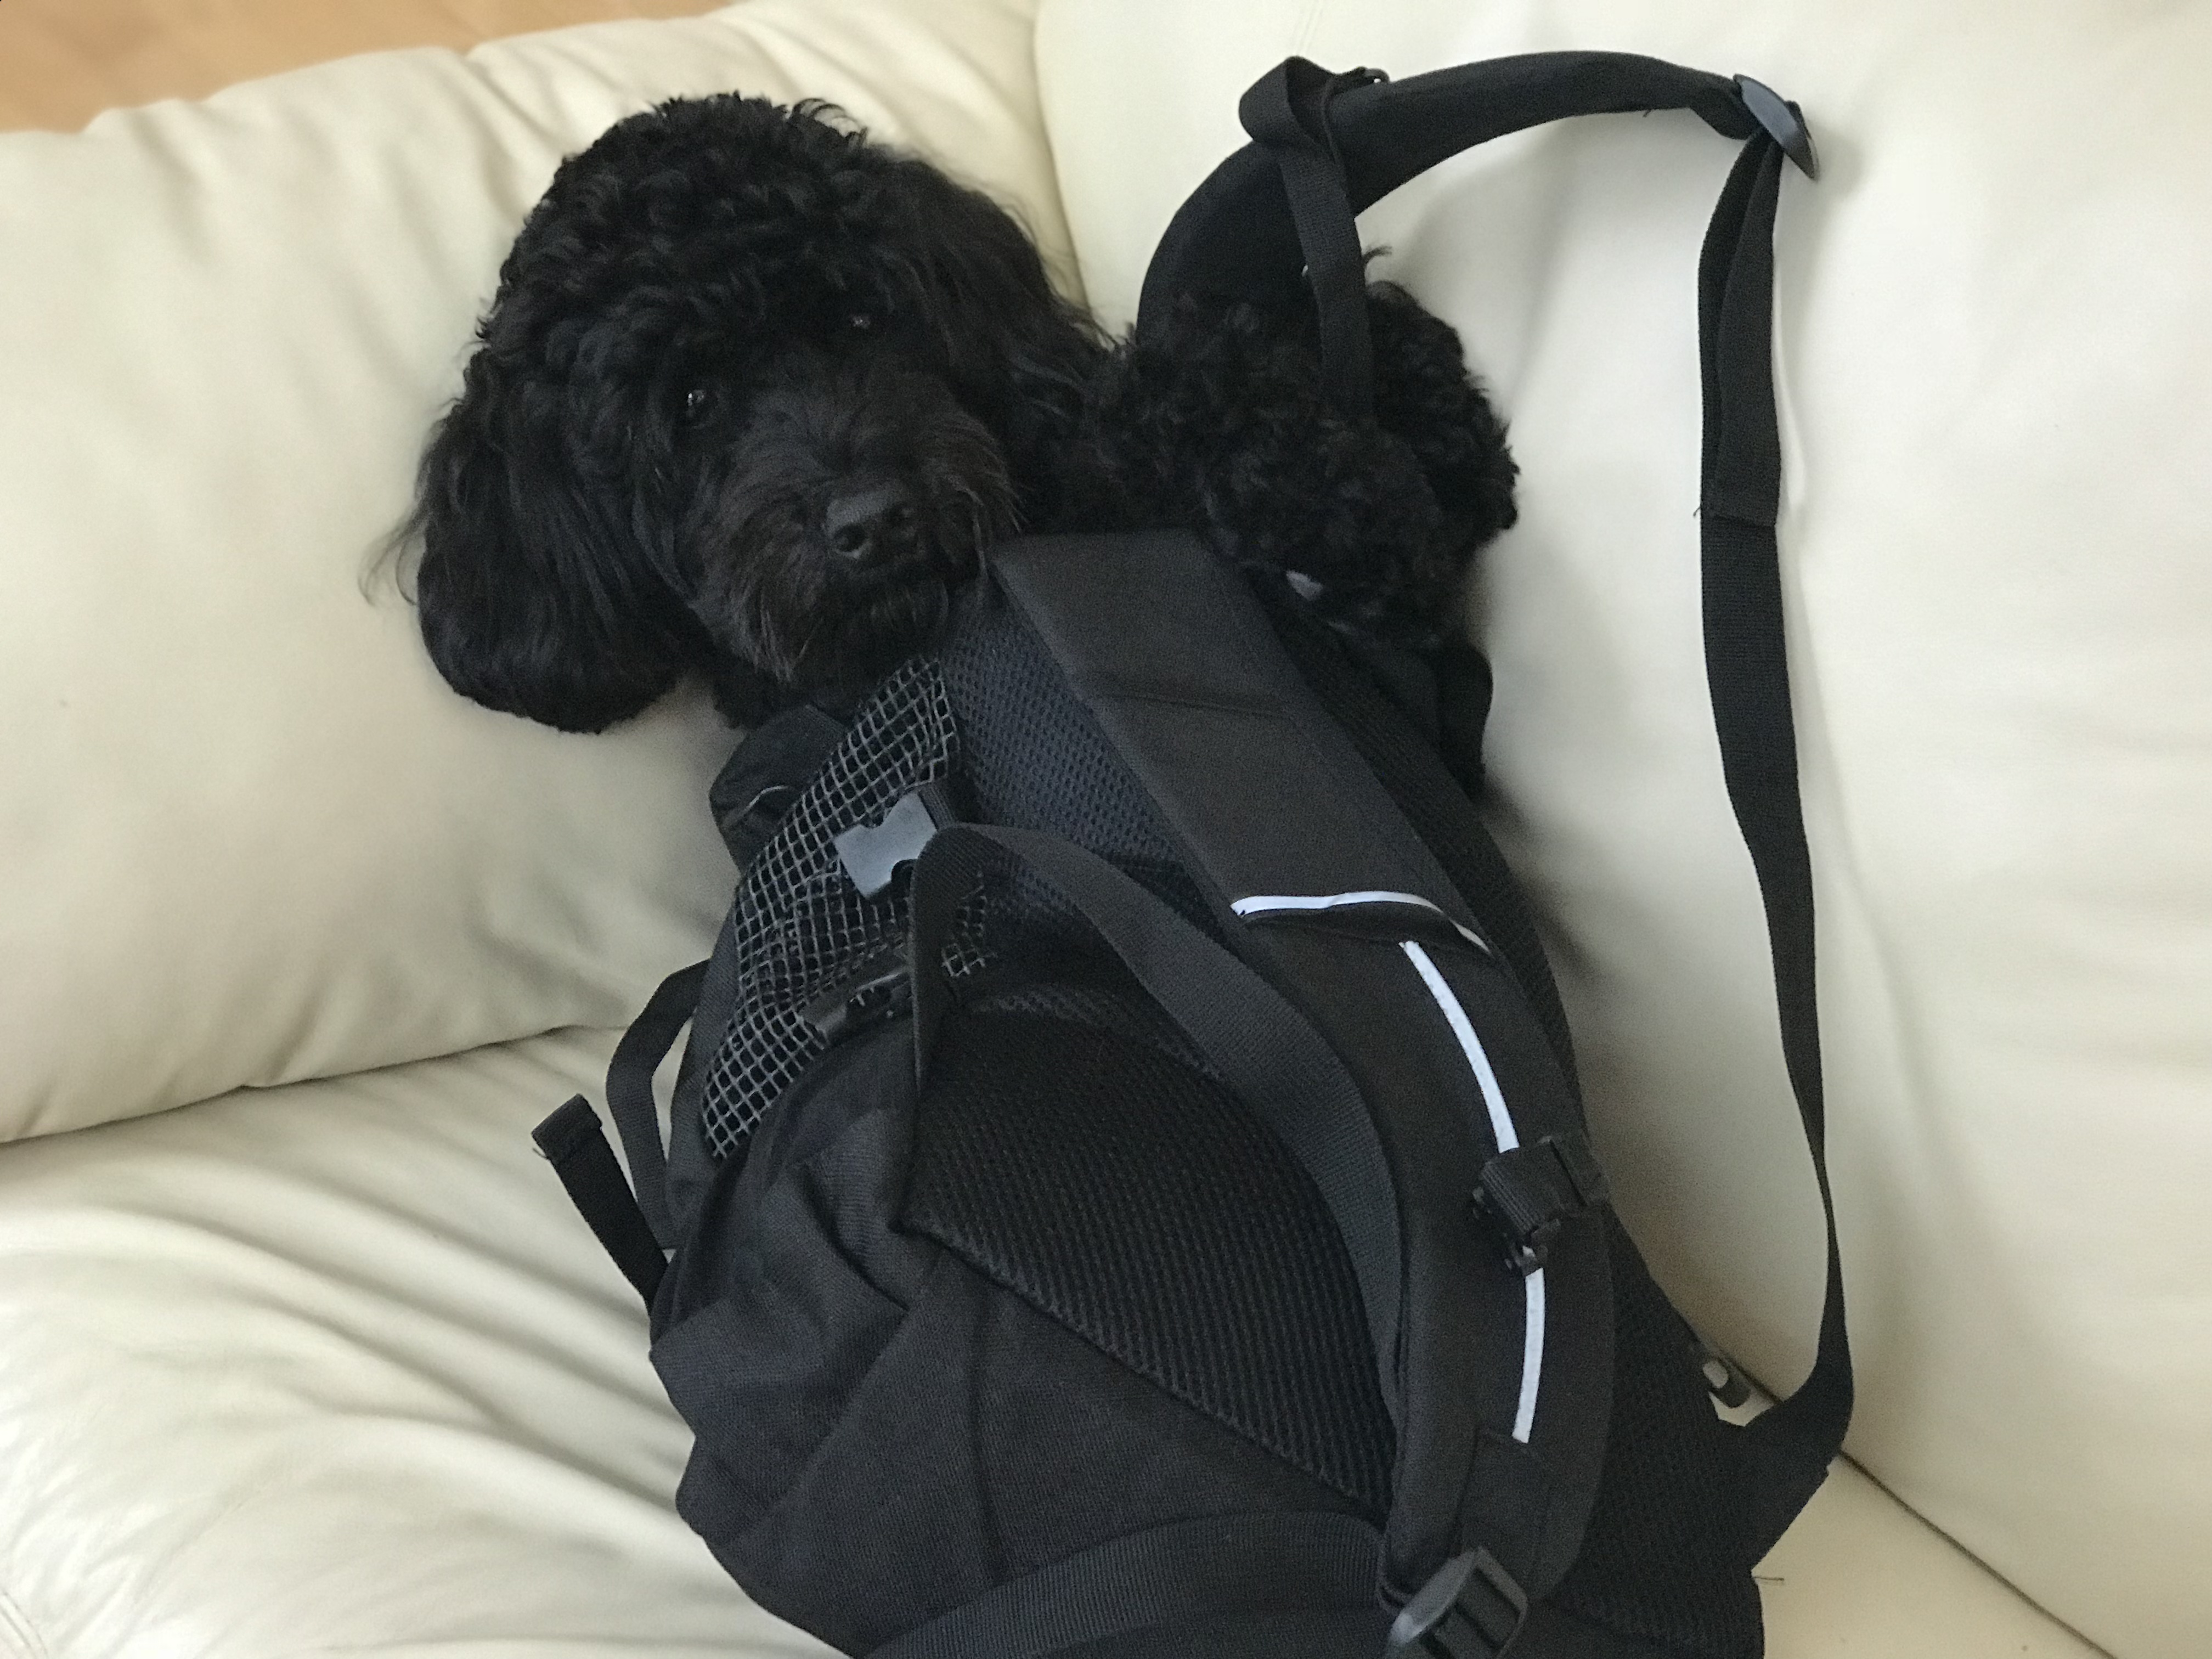 K9 Sport Sack Review: Real life test and results